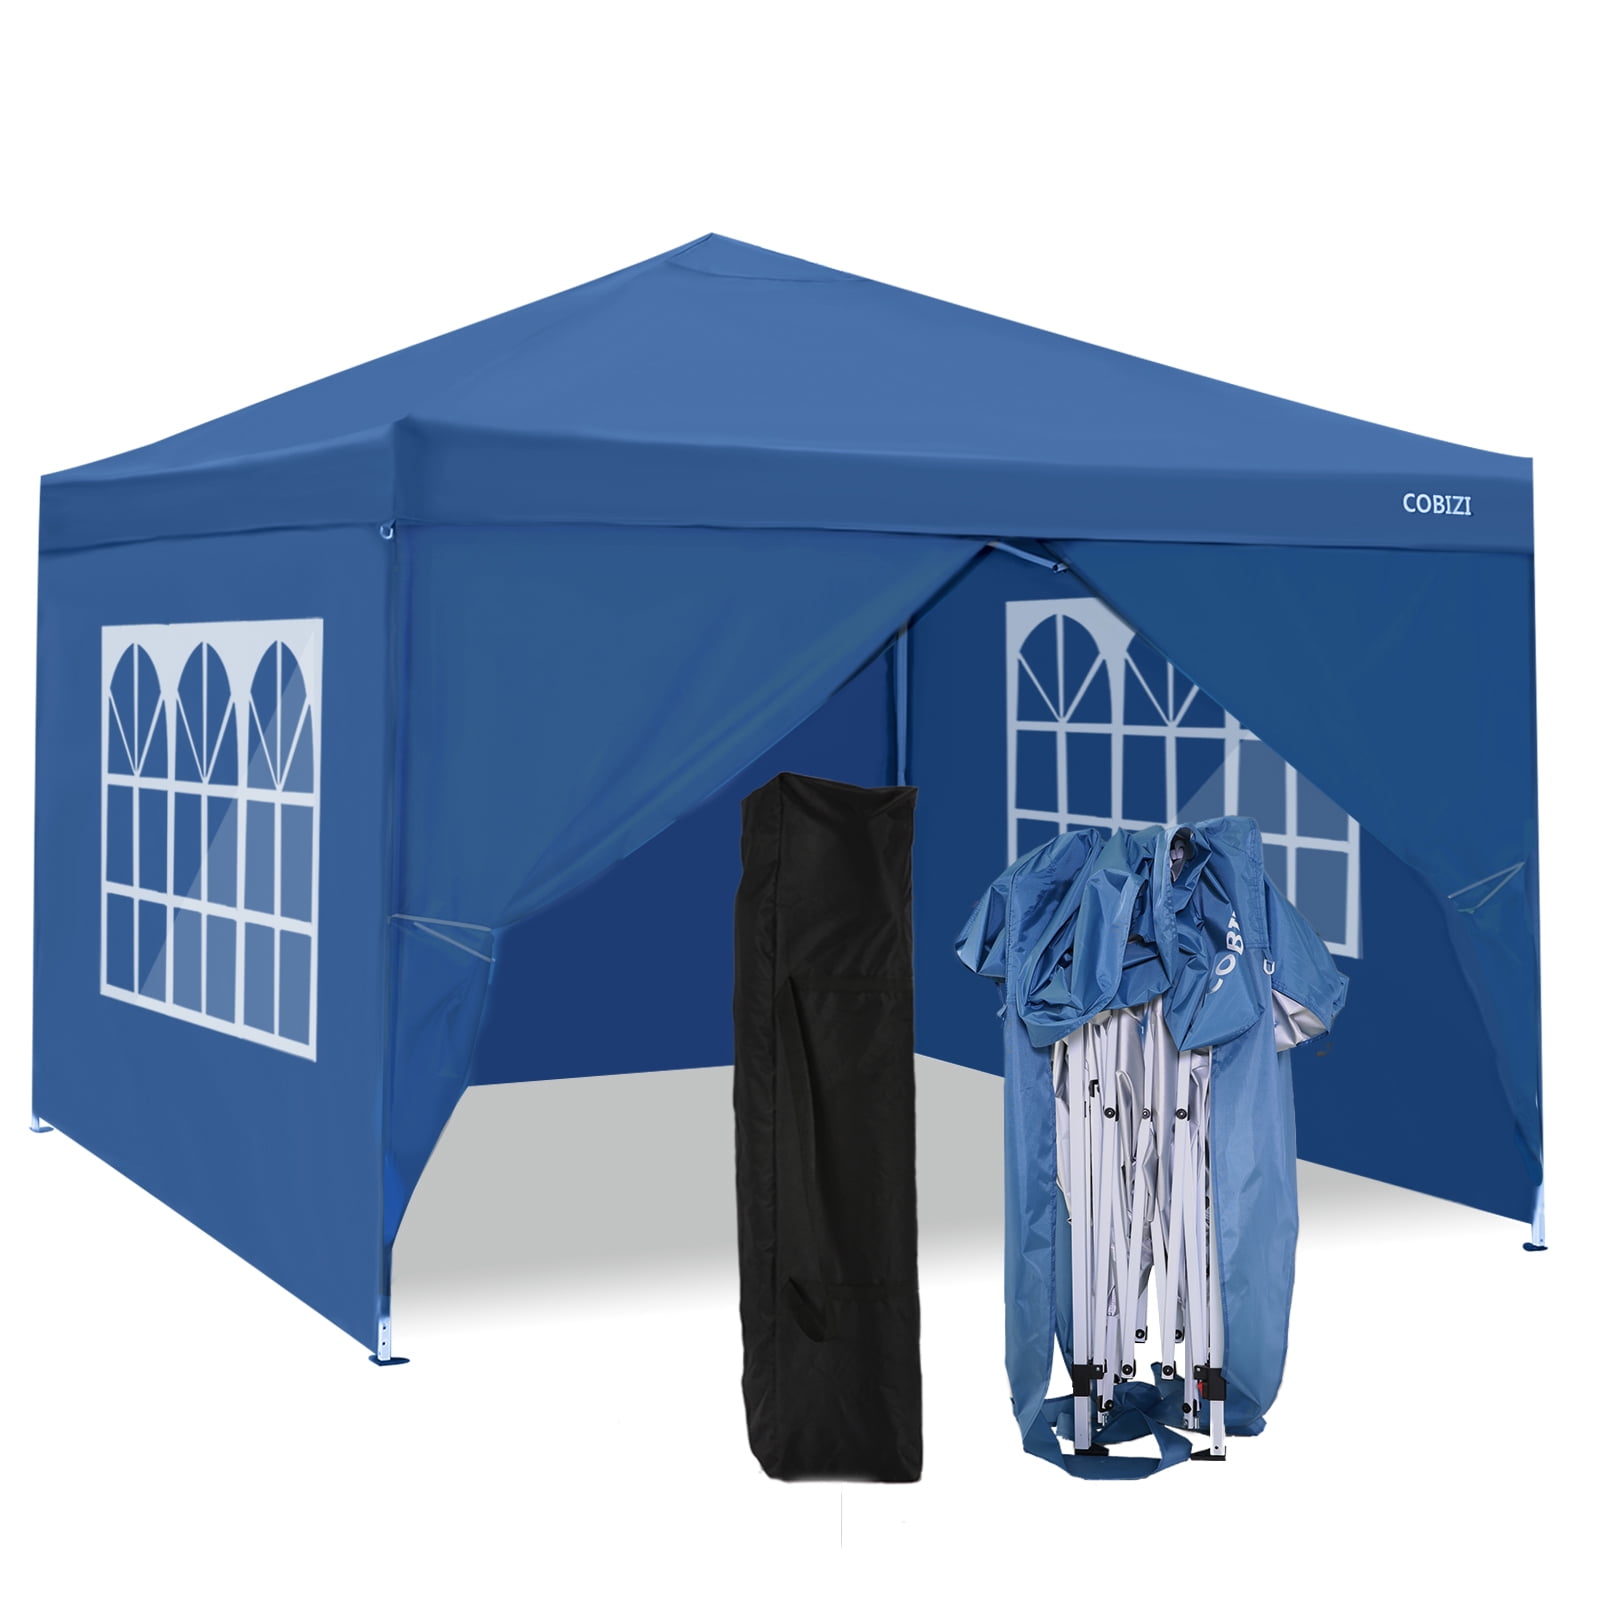 Cobizi 10'x10' Outdoor Canopy Tent Waterproof Pop Backyard Canopy Portable Party Commercial Instant Canopy Shelter Tent Gazebo with 4 Removable Sidewalls & Carrying Bag for Wedding Picnics Camping - Walmart.com